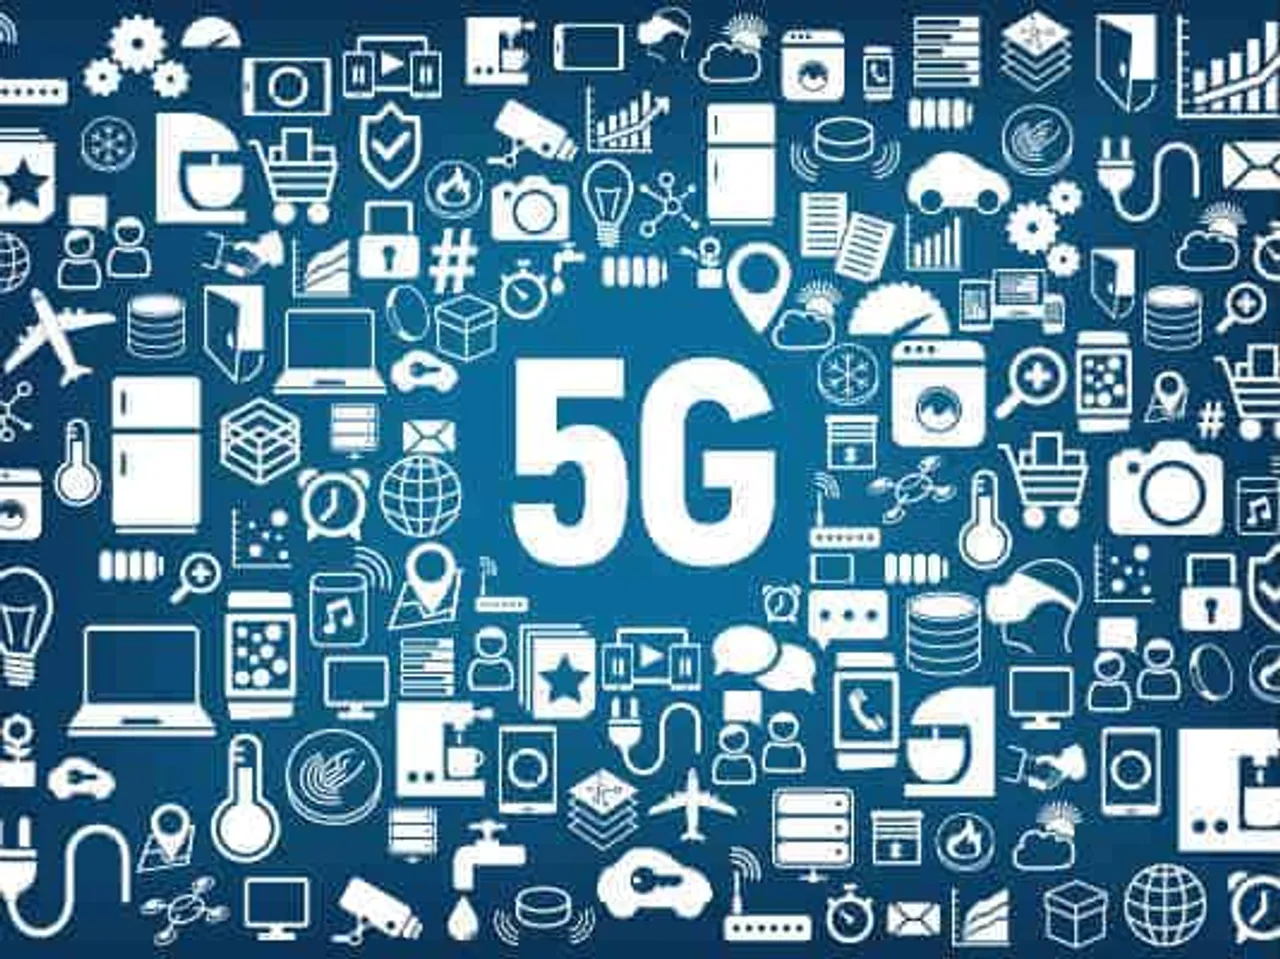 IBM, Ericsson announce research advance for 5G communications networks